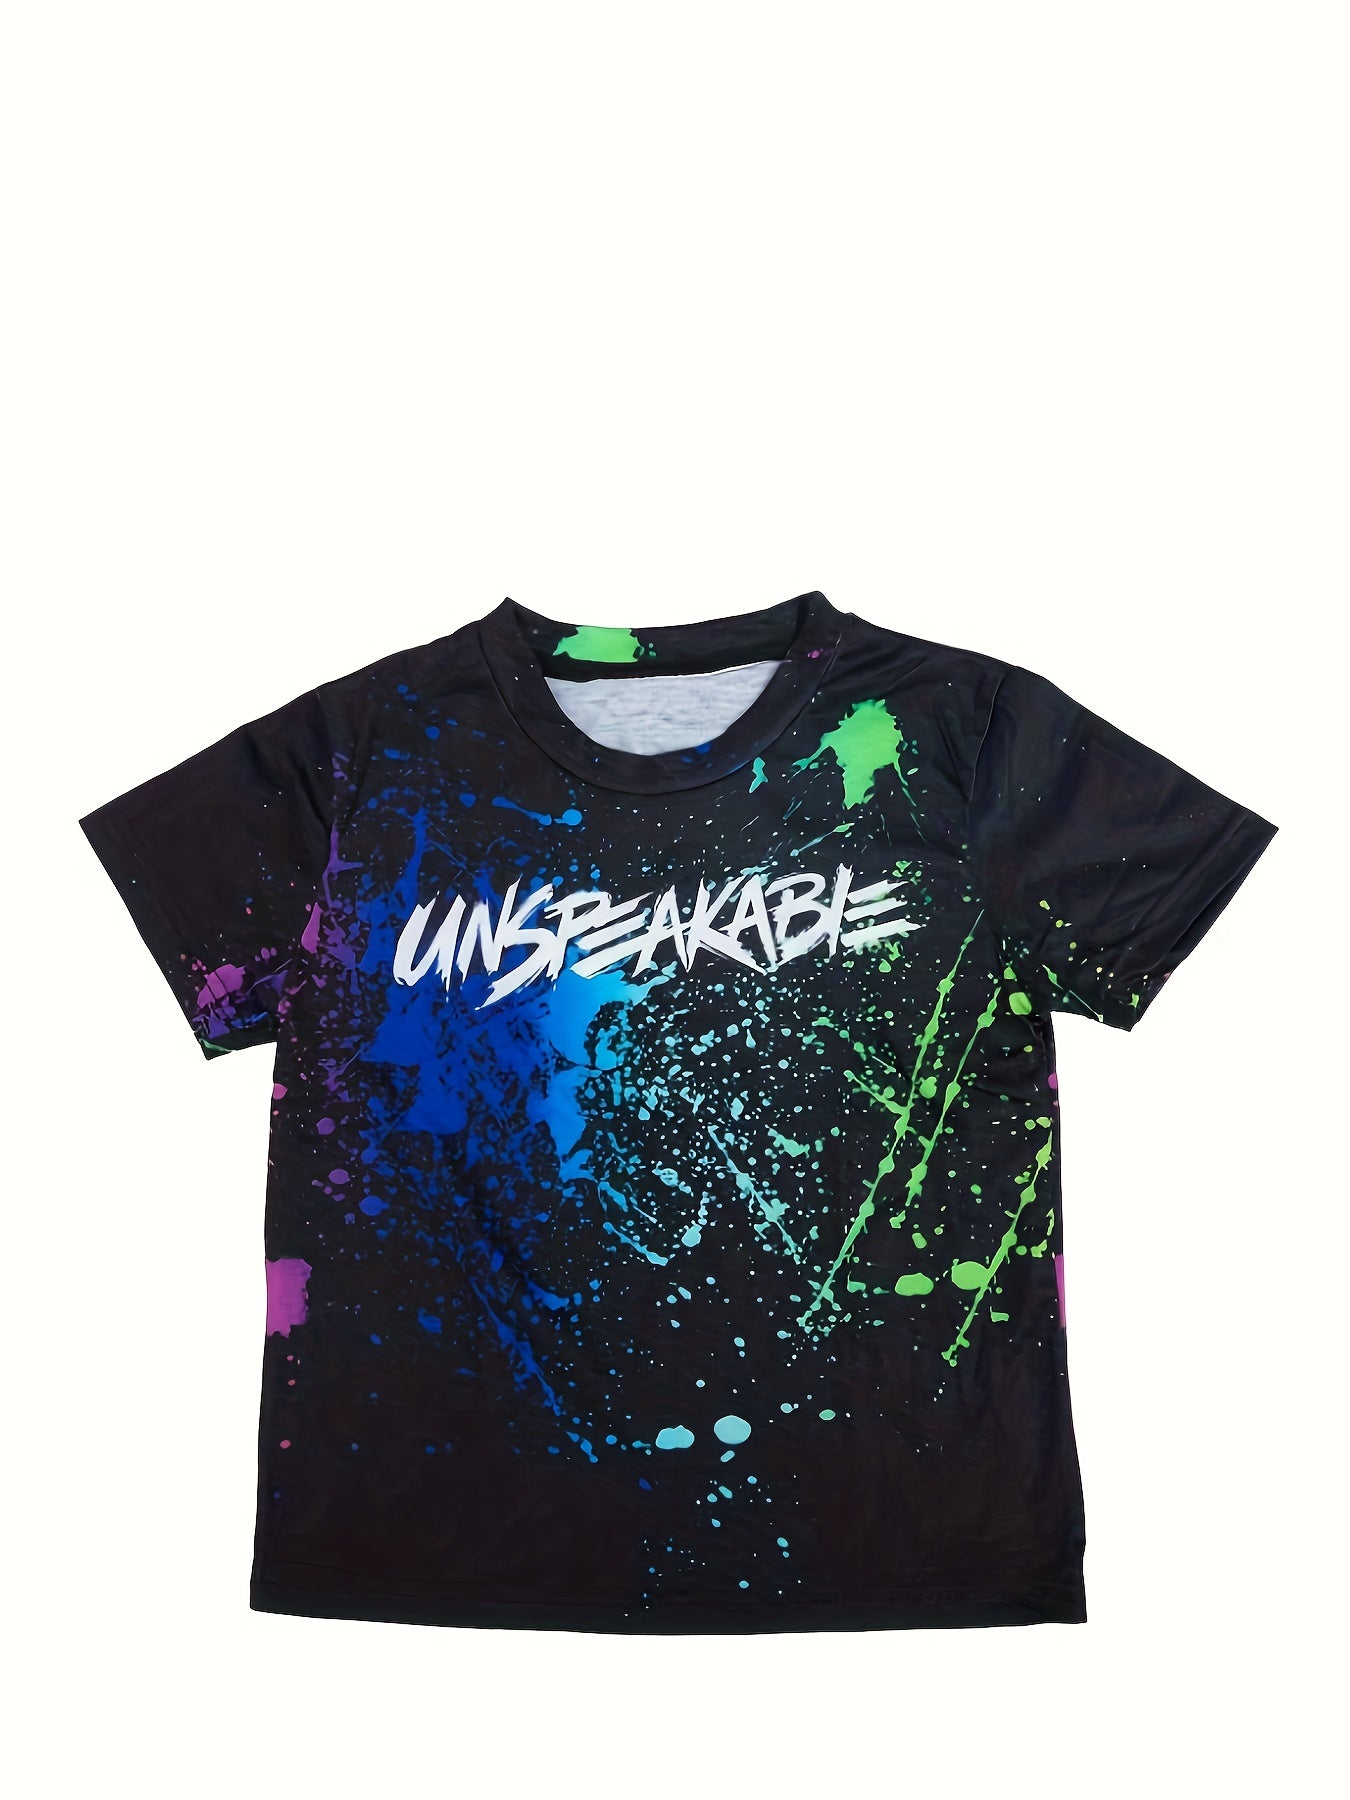 UNSPEAKABLE Print T-shirt For Cool Kids! Casual Short Sleeve Top, Unisex Tee, Girl's & Boy's Clothes For Summer